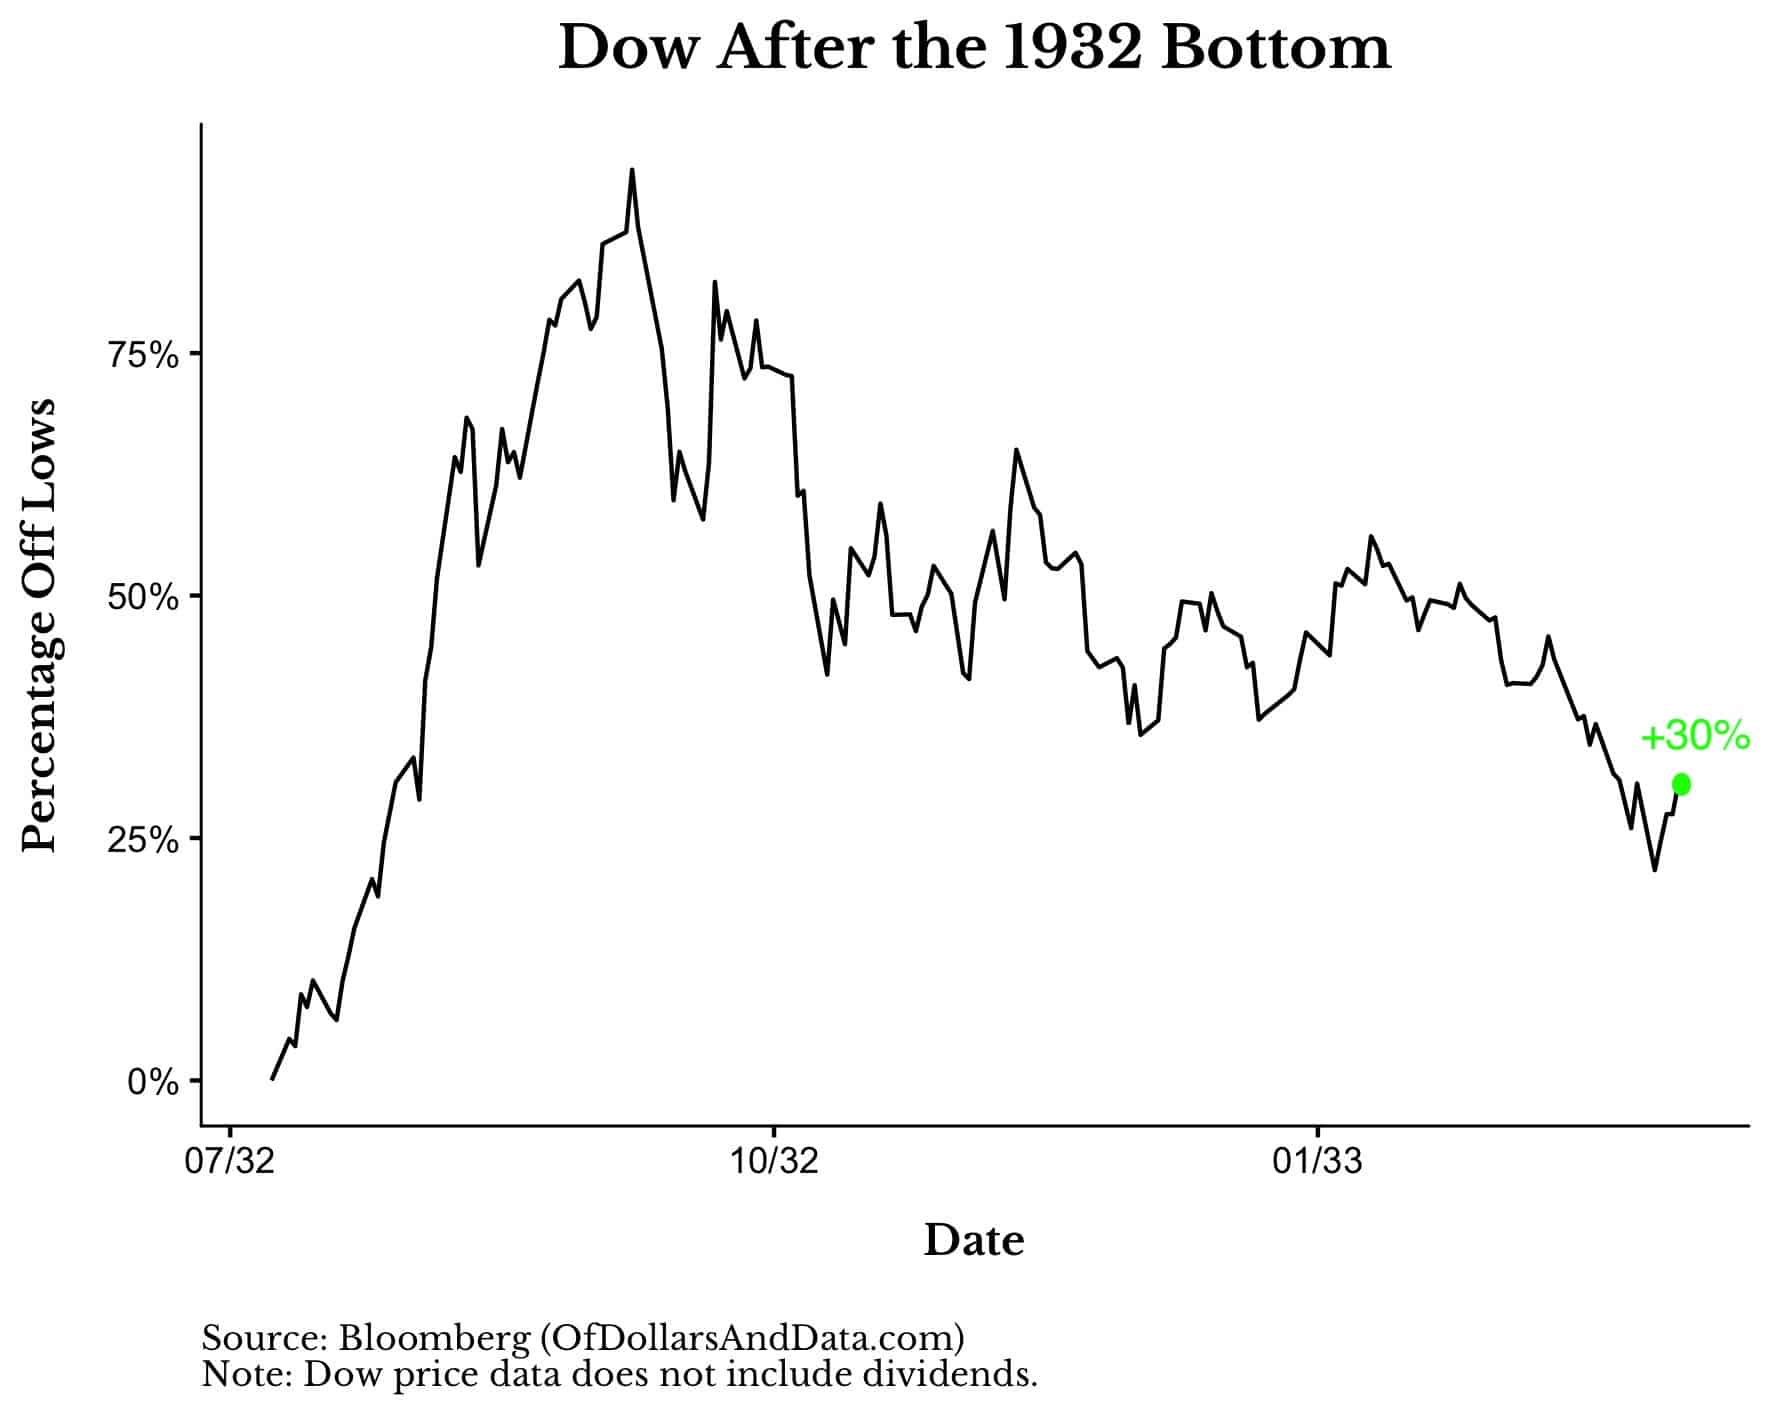 The Dow Jones Industrial Average from the 1932 bottom to March 1933